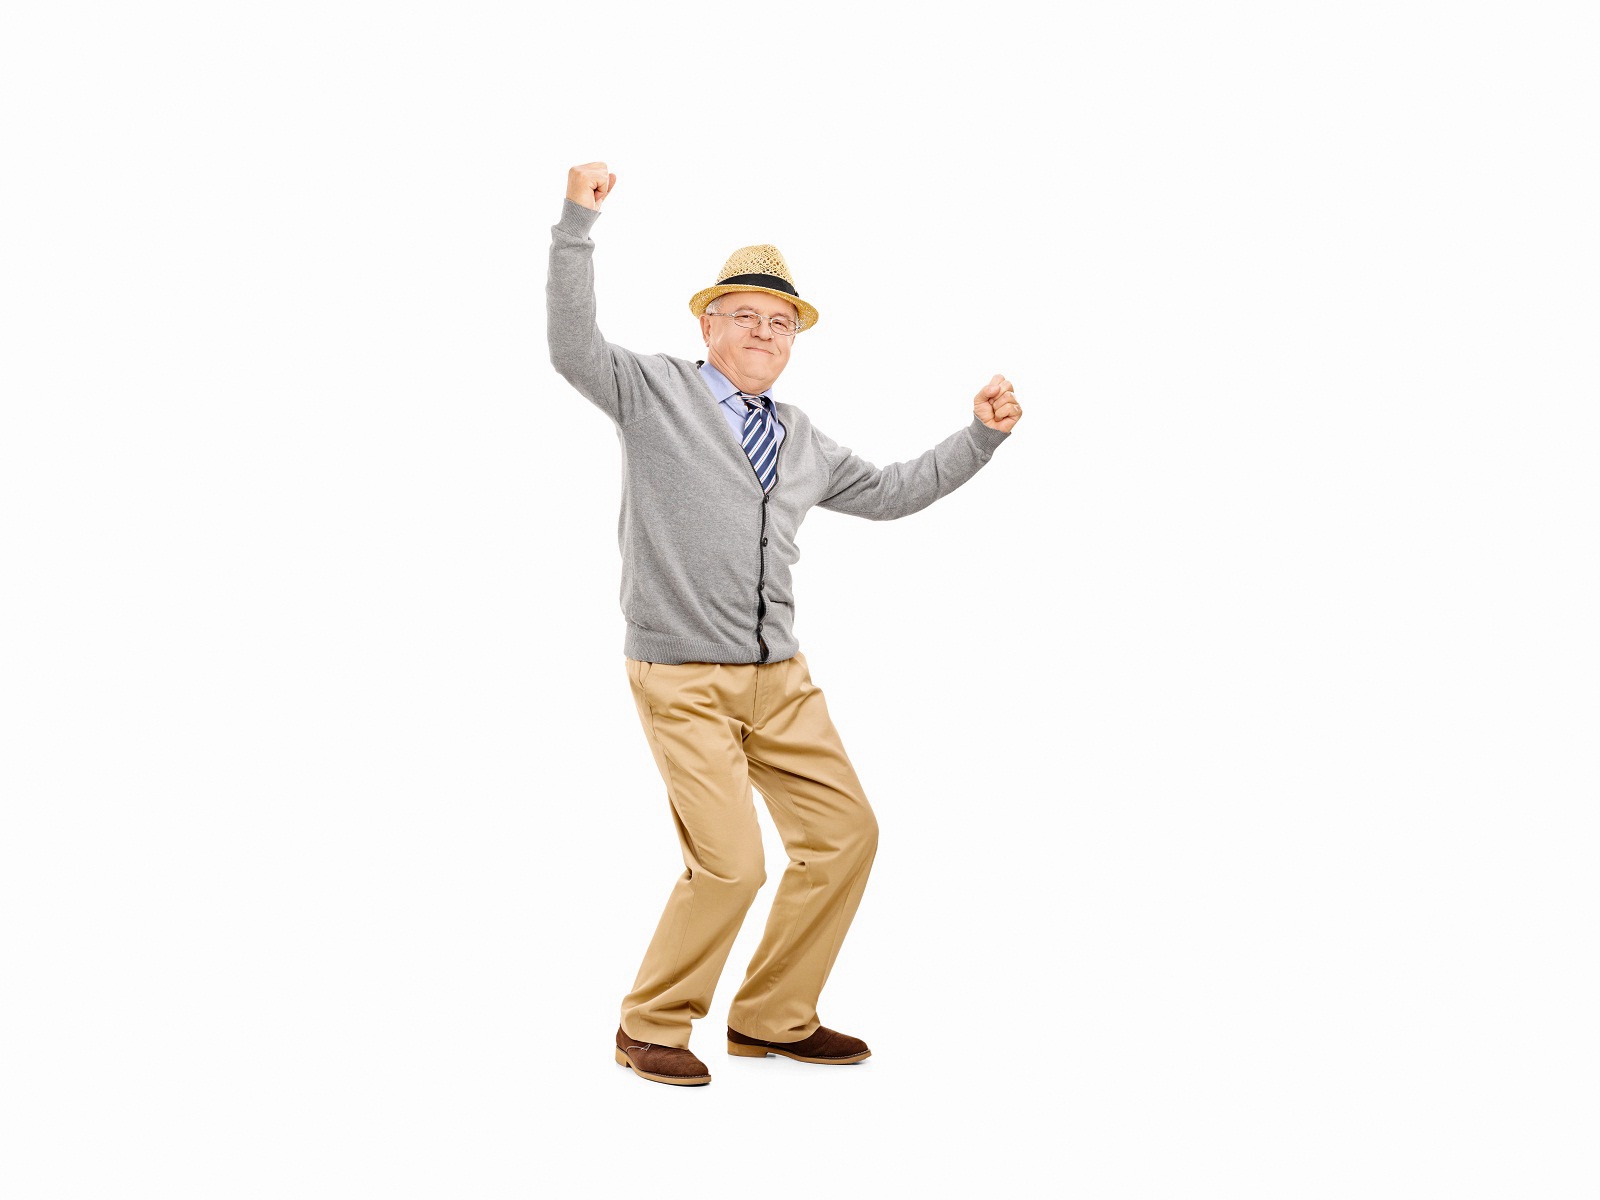 Free download Funny old man dance wallpaper New hd wallpaperNew hd for Desk...